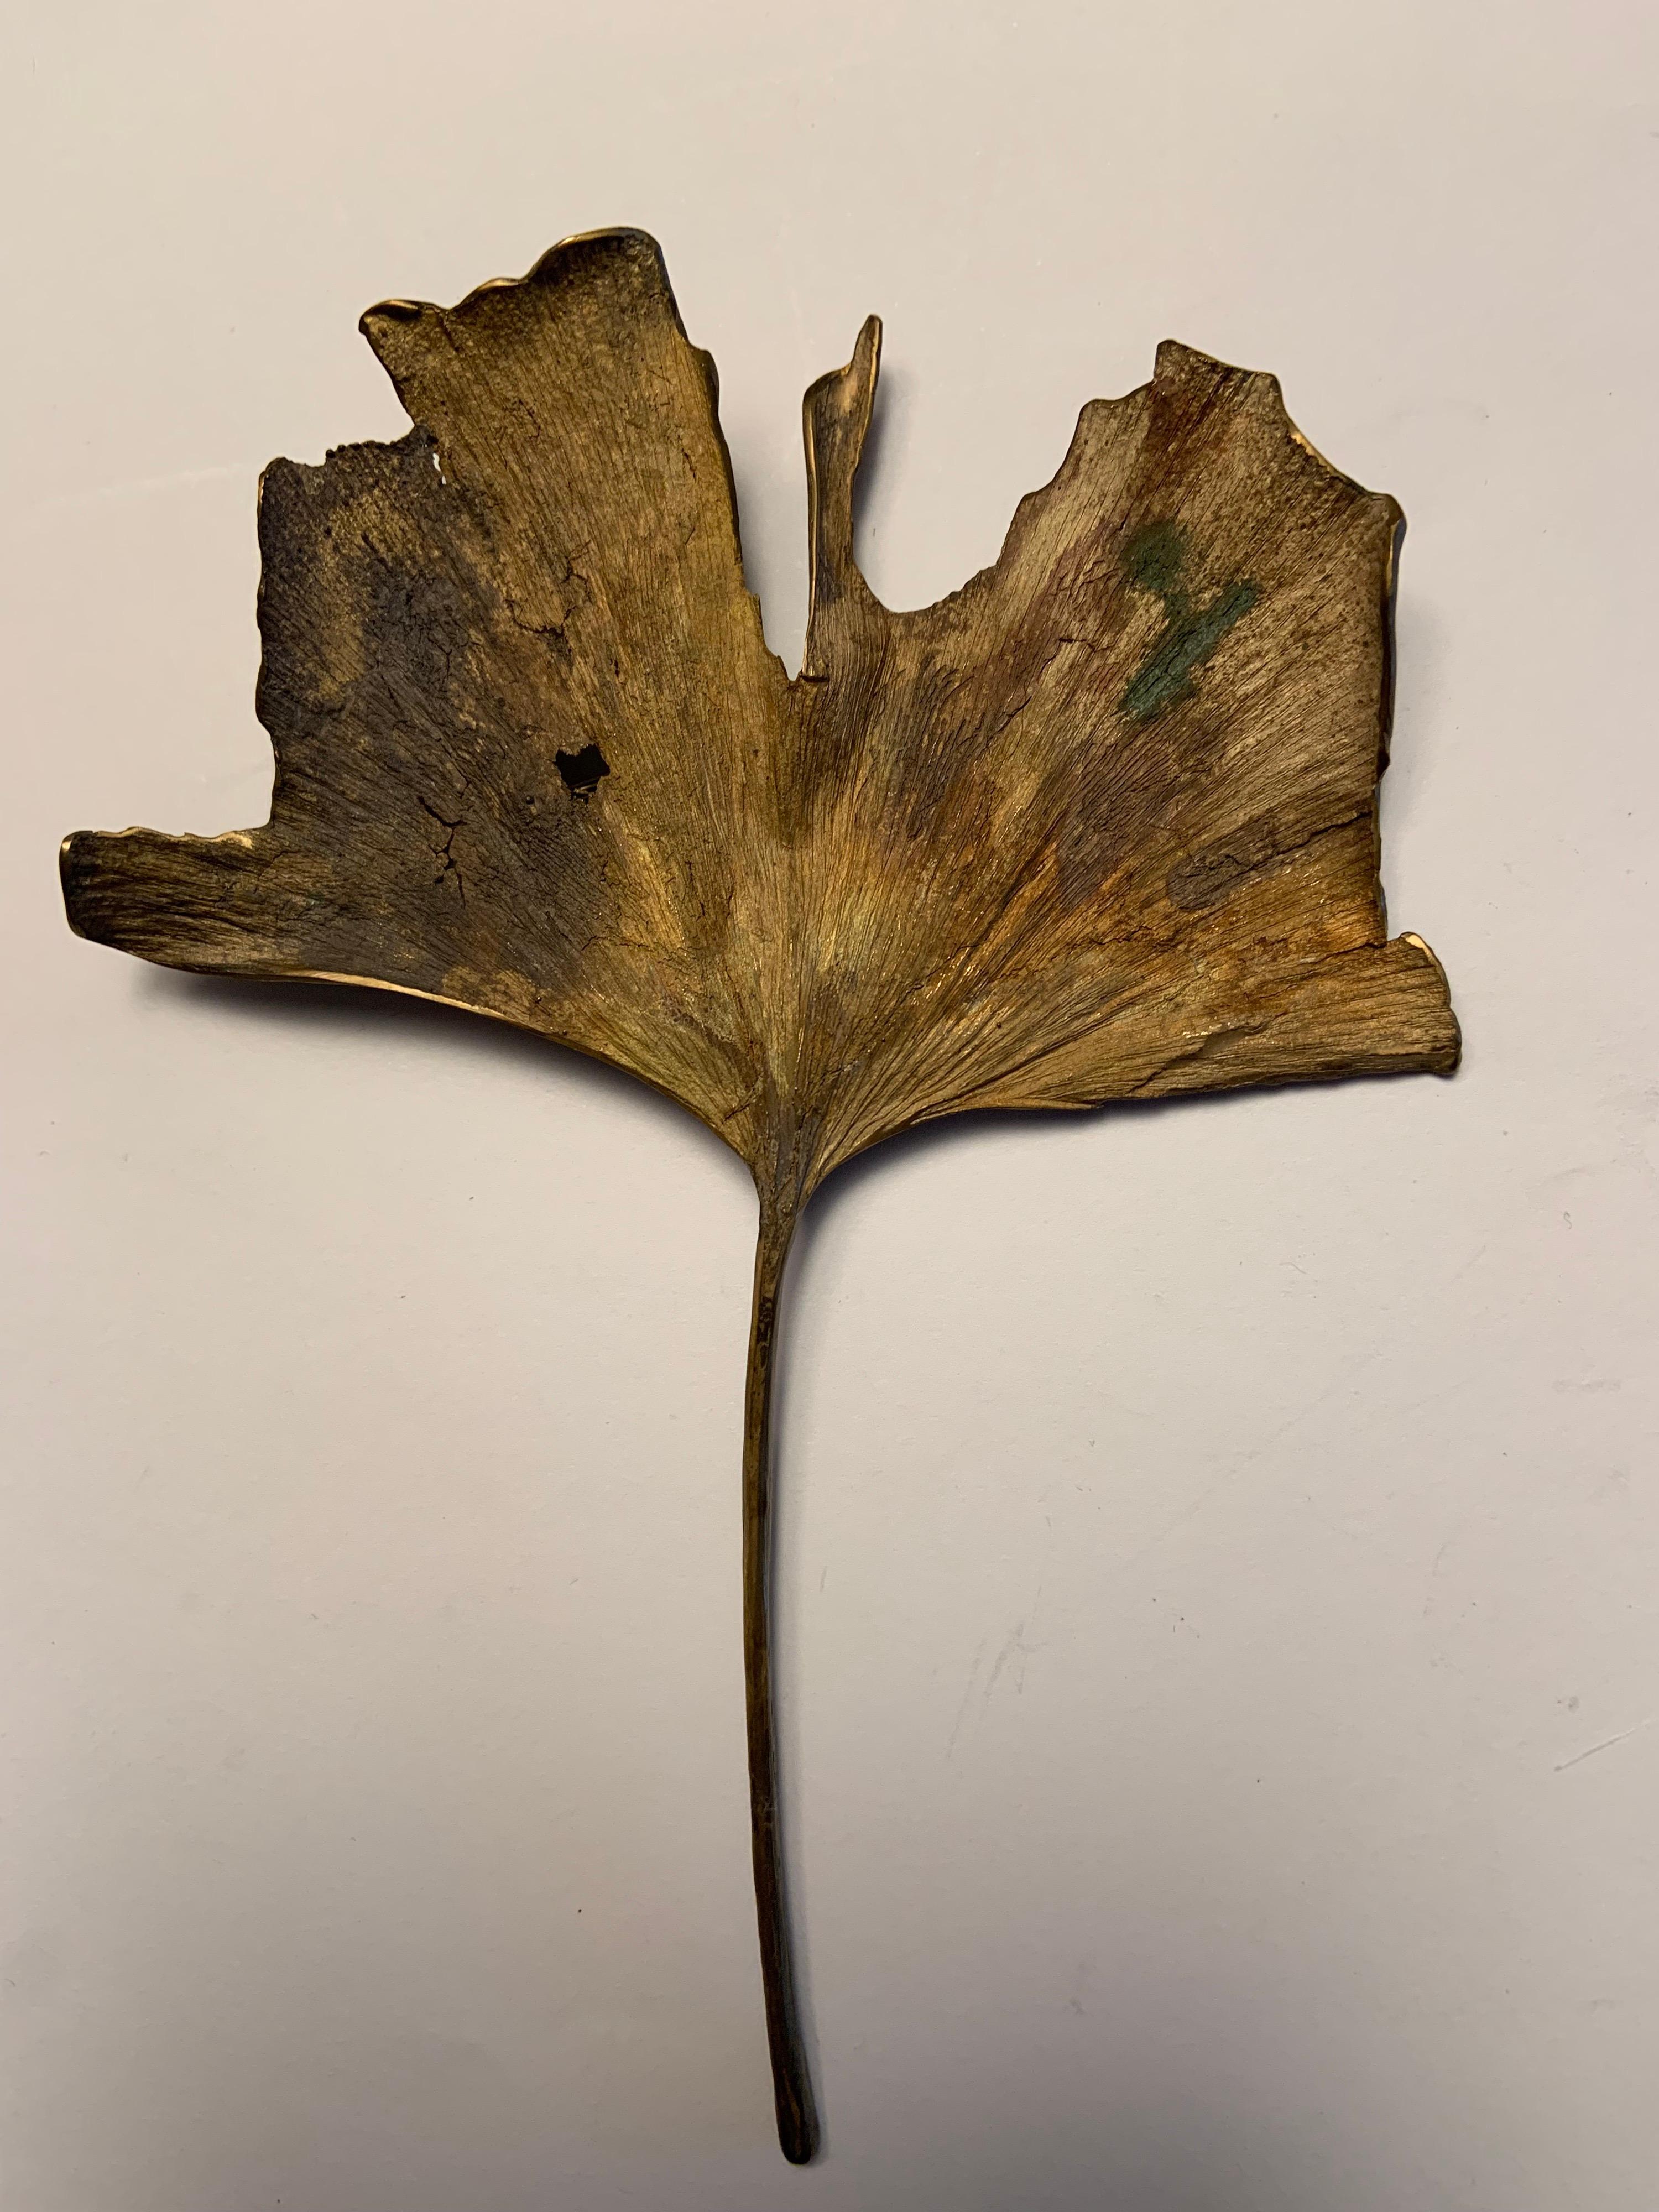 John Iversen is a well known contemporary American jeweler, based in East Hampton, NY.  He regularly exhibits at the top Crafts Shows in the United States and Europe and has exhibited at Design Basel.
This Gingko leaf pin is one from his series of